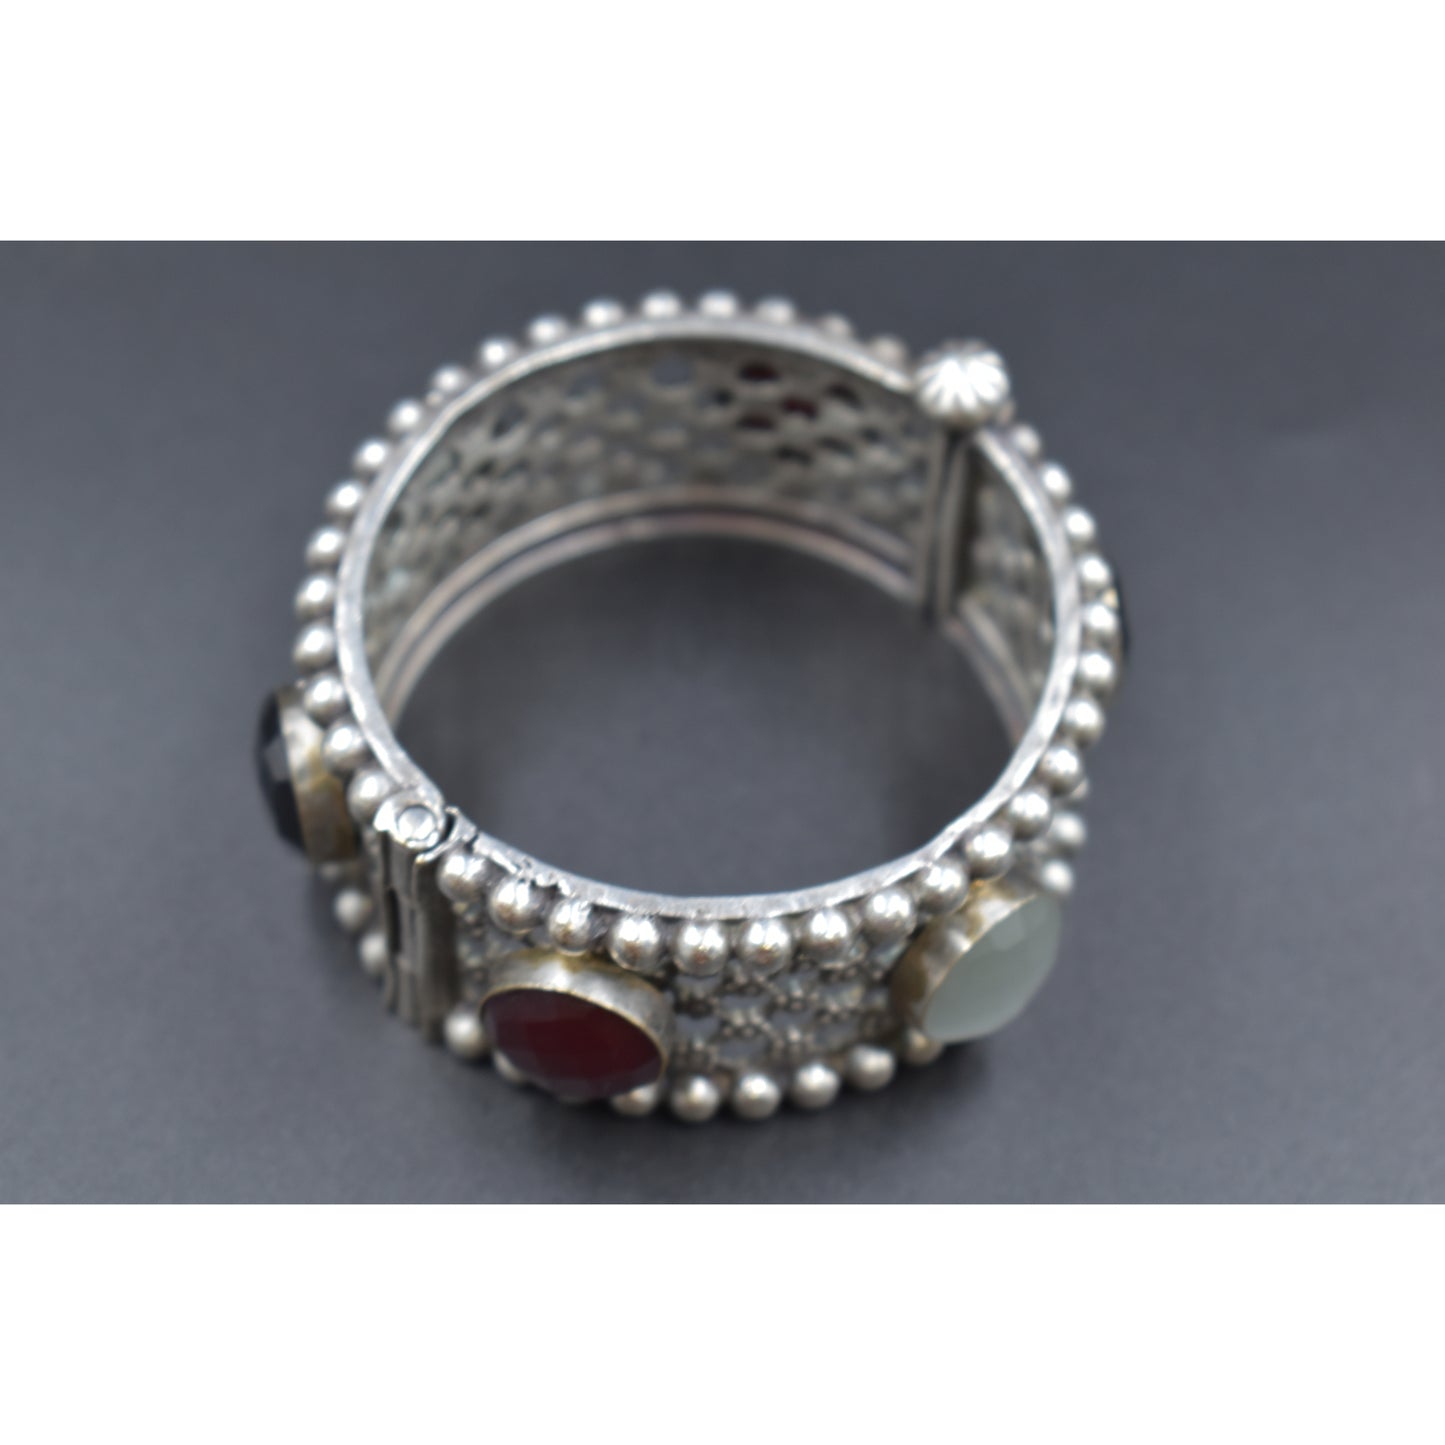 A pair of silver look alike stone bangle